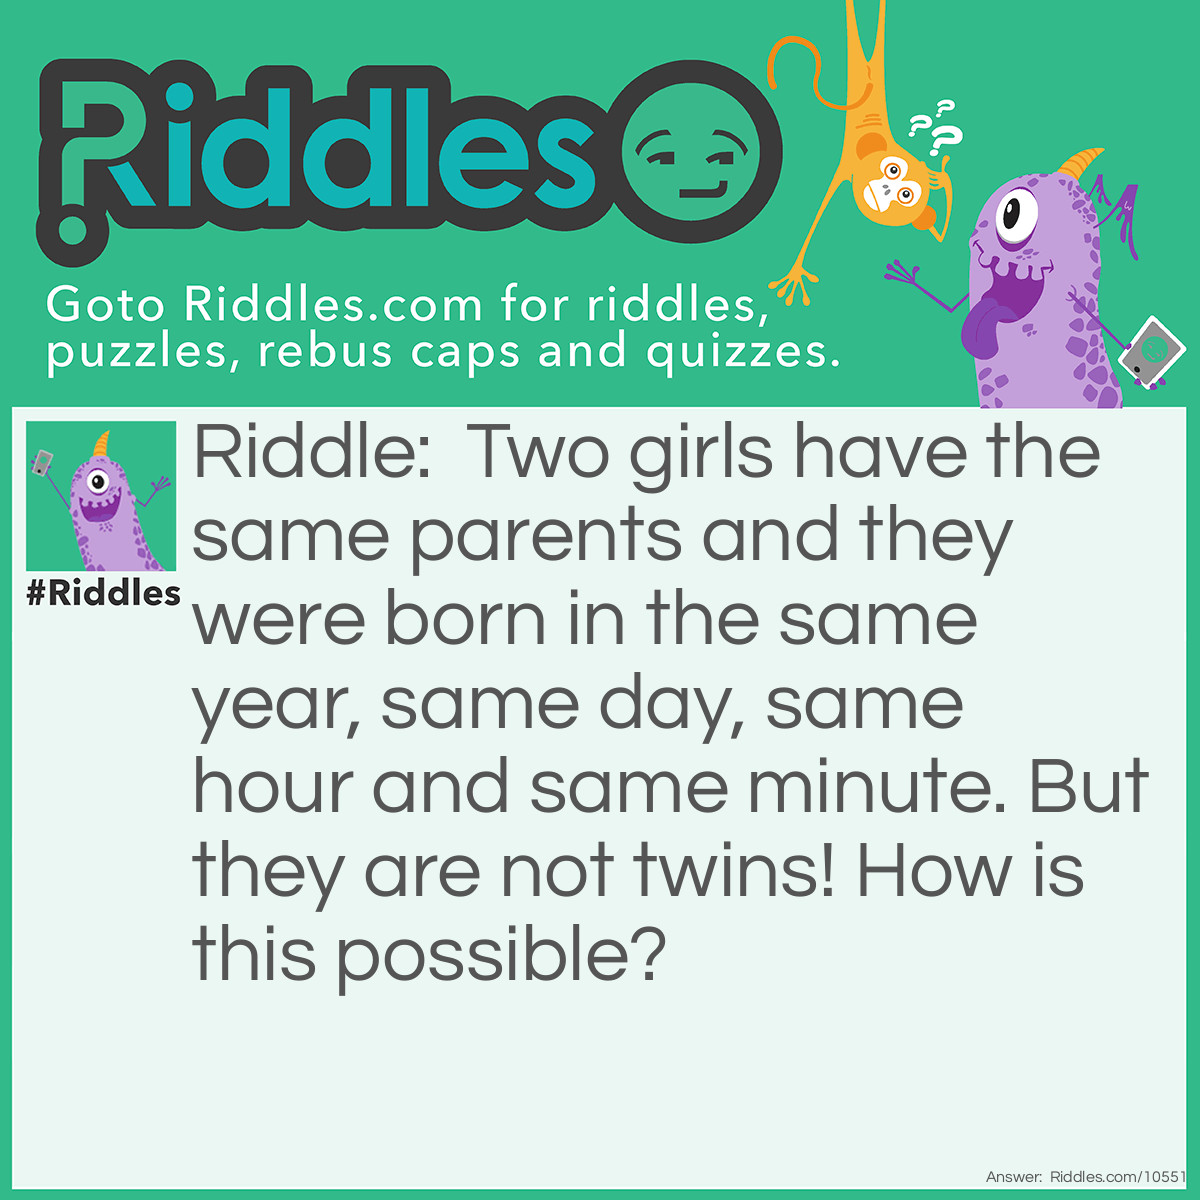 Riddle: Two girls have the same parents and they were born in the same year, same day, same hour and same minute. But they are not twins! How is this possible? Answer: They were two girls from a set of triplets.